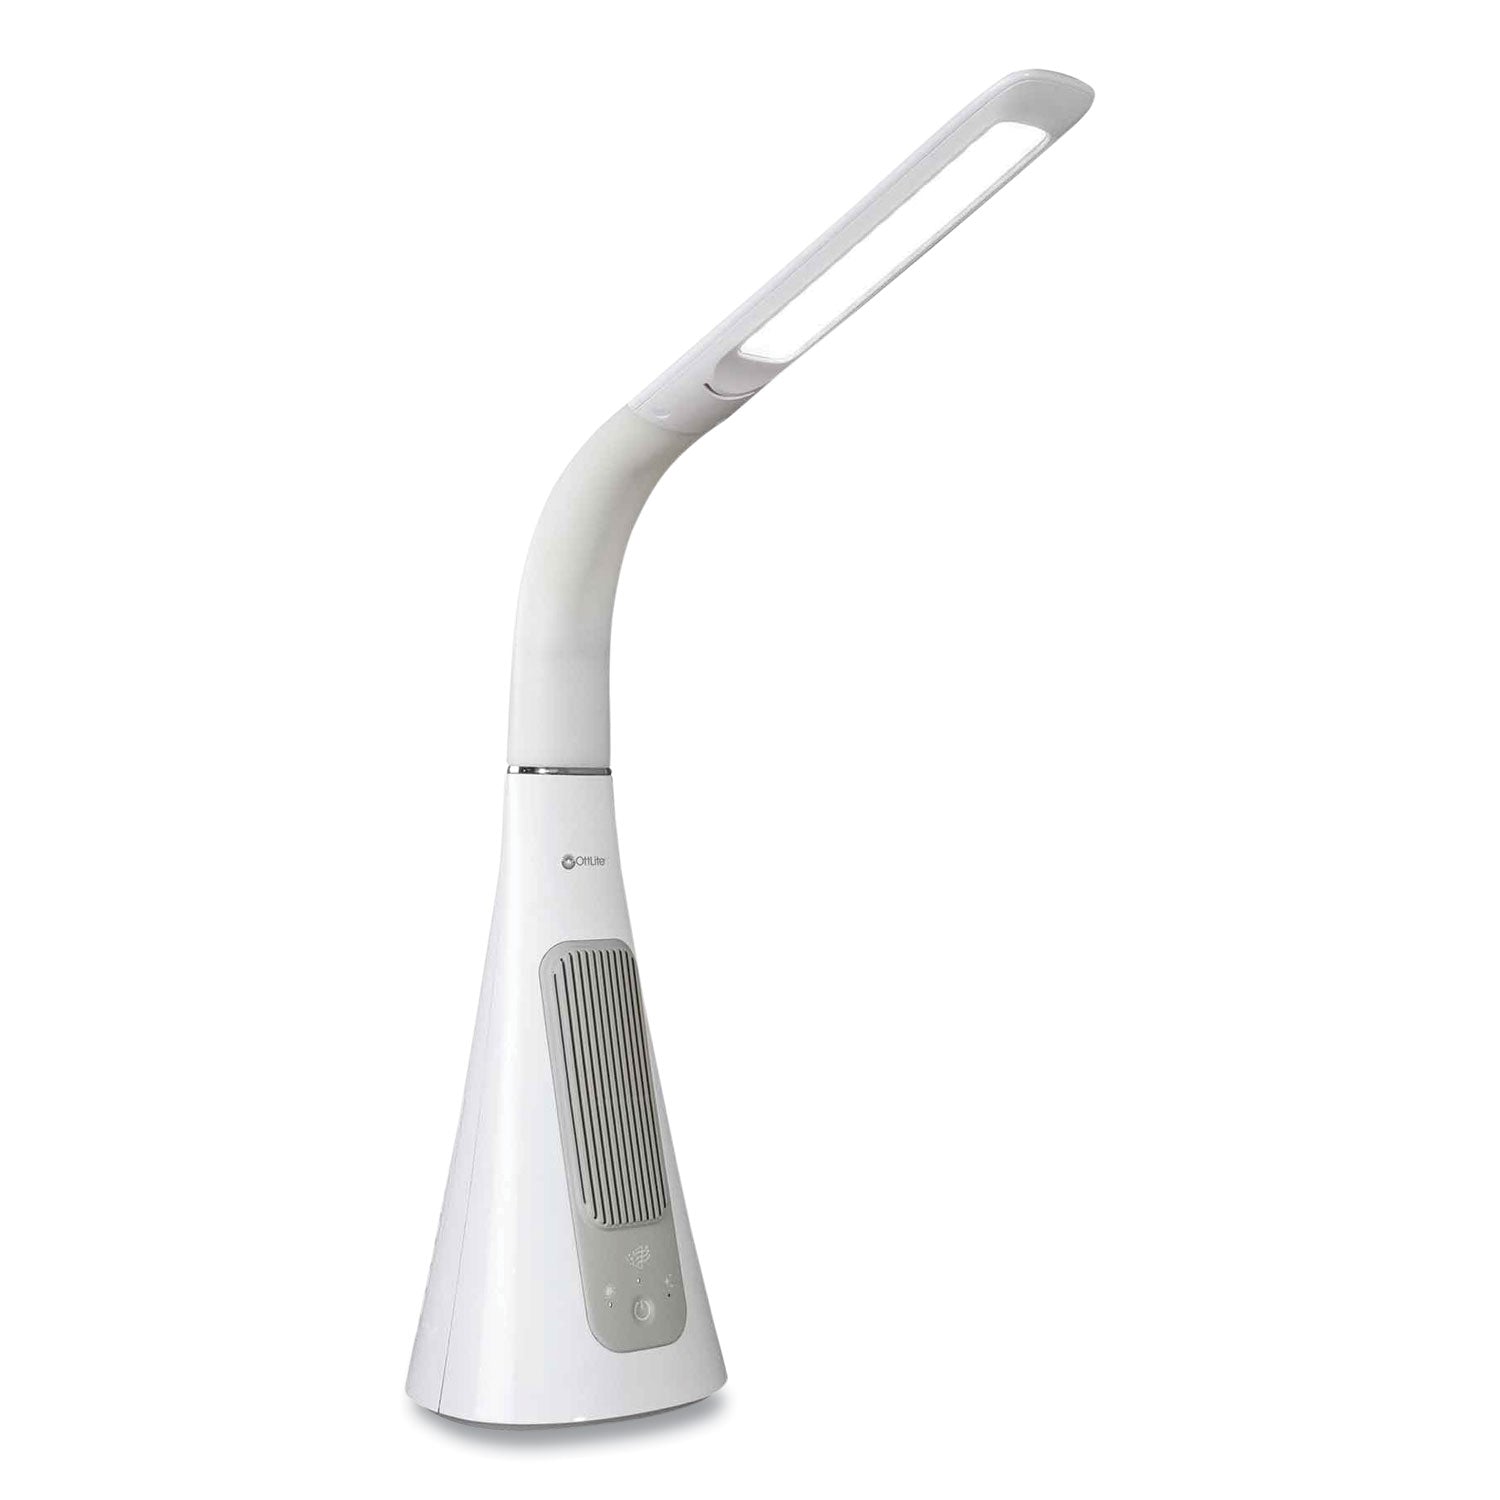 wellness-series-sanitizingpro-led-desk-lamp-and-uv-air-purifier-15-to-25-high-white-ships-in-4-6-business-days_ottsc1ap00s - 1